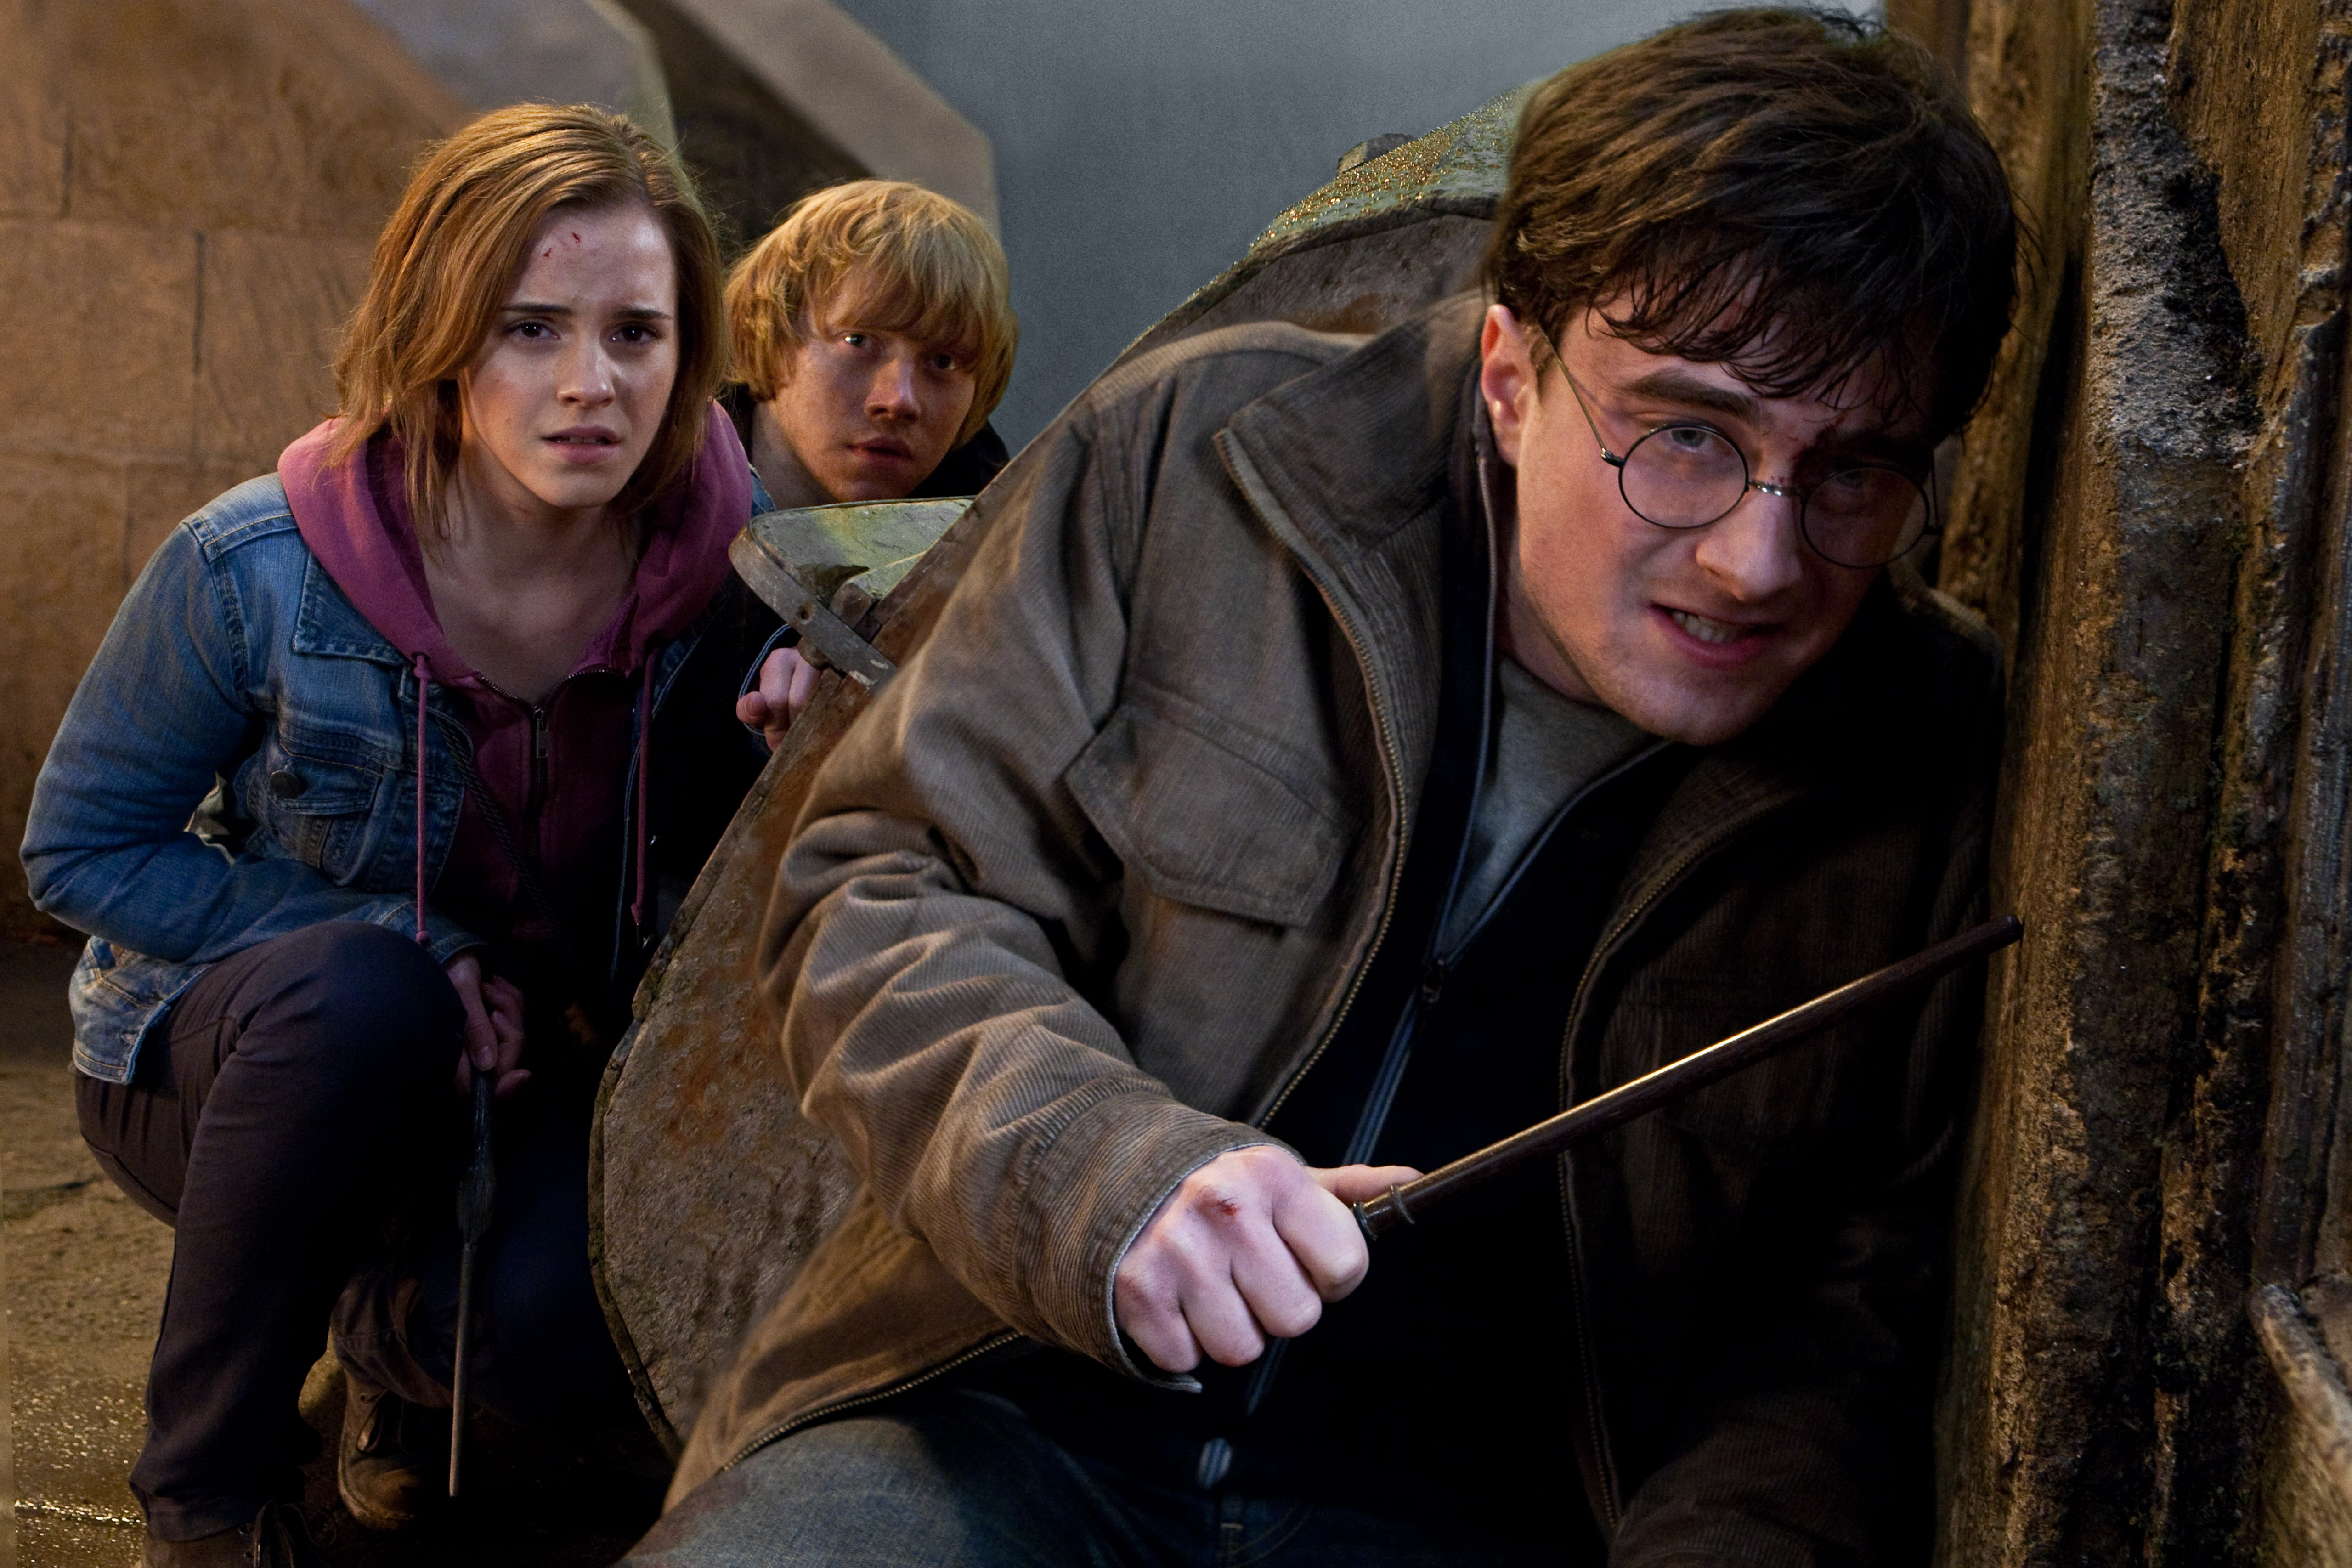 (L-r) EMMA WATSON as Hermione Granger, RUPERT GRINT as Ron Weasley and DANIEL RADCLIFFE as Harry Potter in Warner Bros. Picturesâ fantasy adventure âHARRY POTTER AND THE DEATHLY HALLOWS â PART 2,â a Warner Bros. Pictures release.